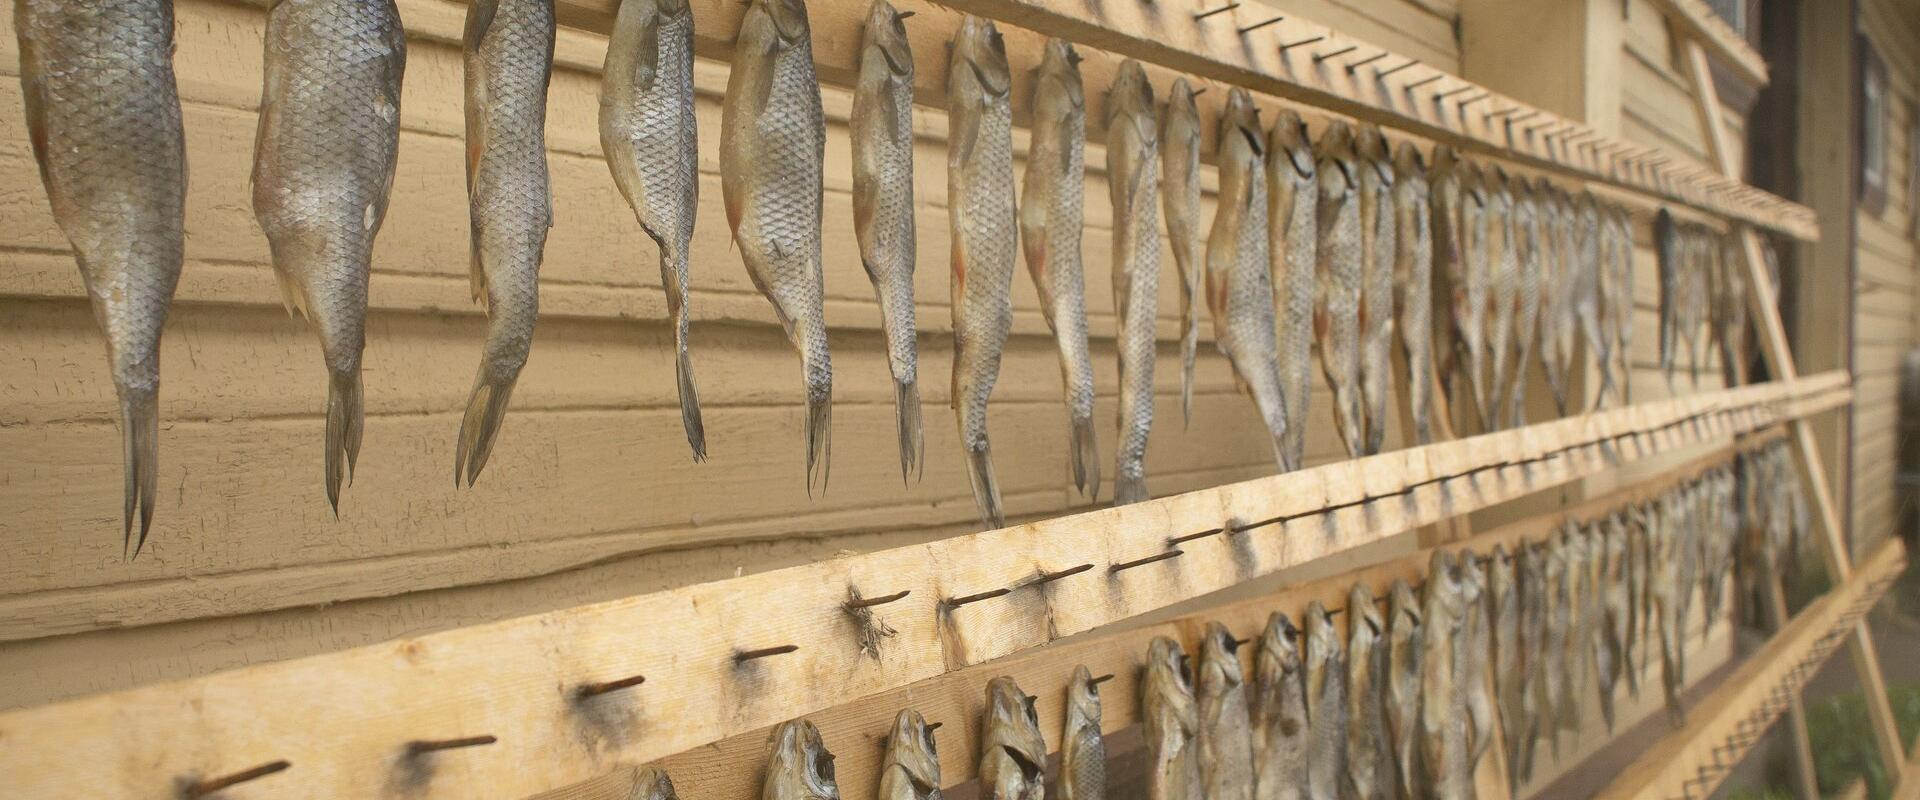 Rows of fish drying on a barn wall